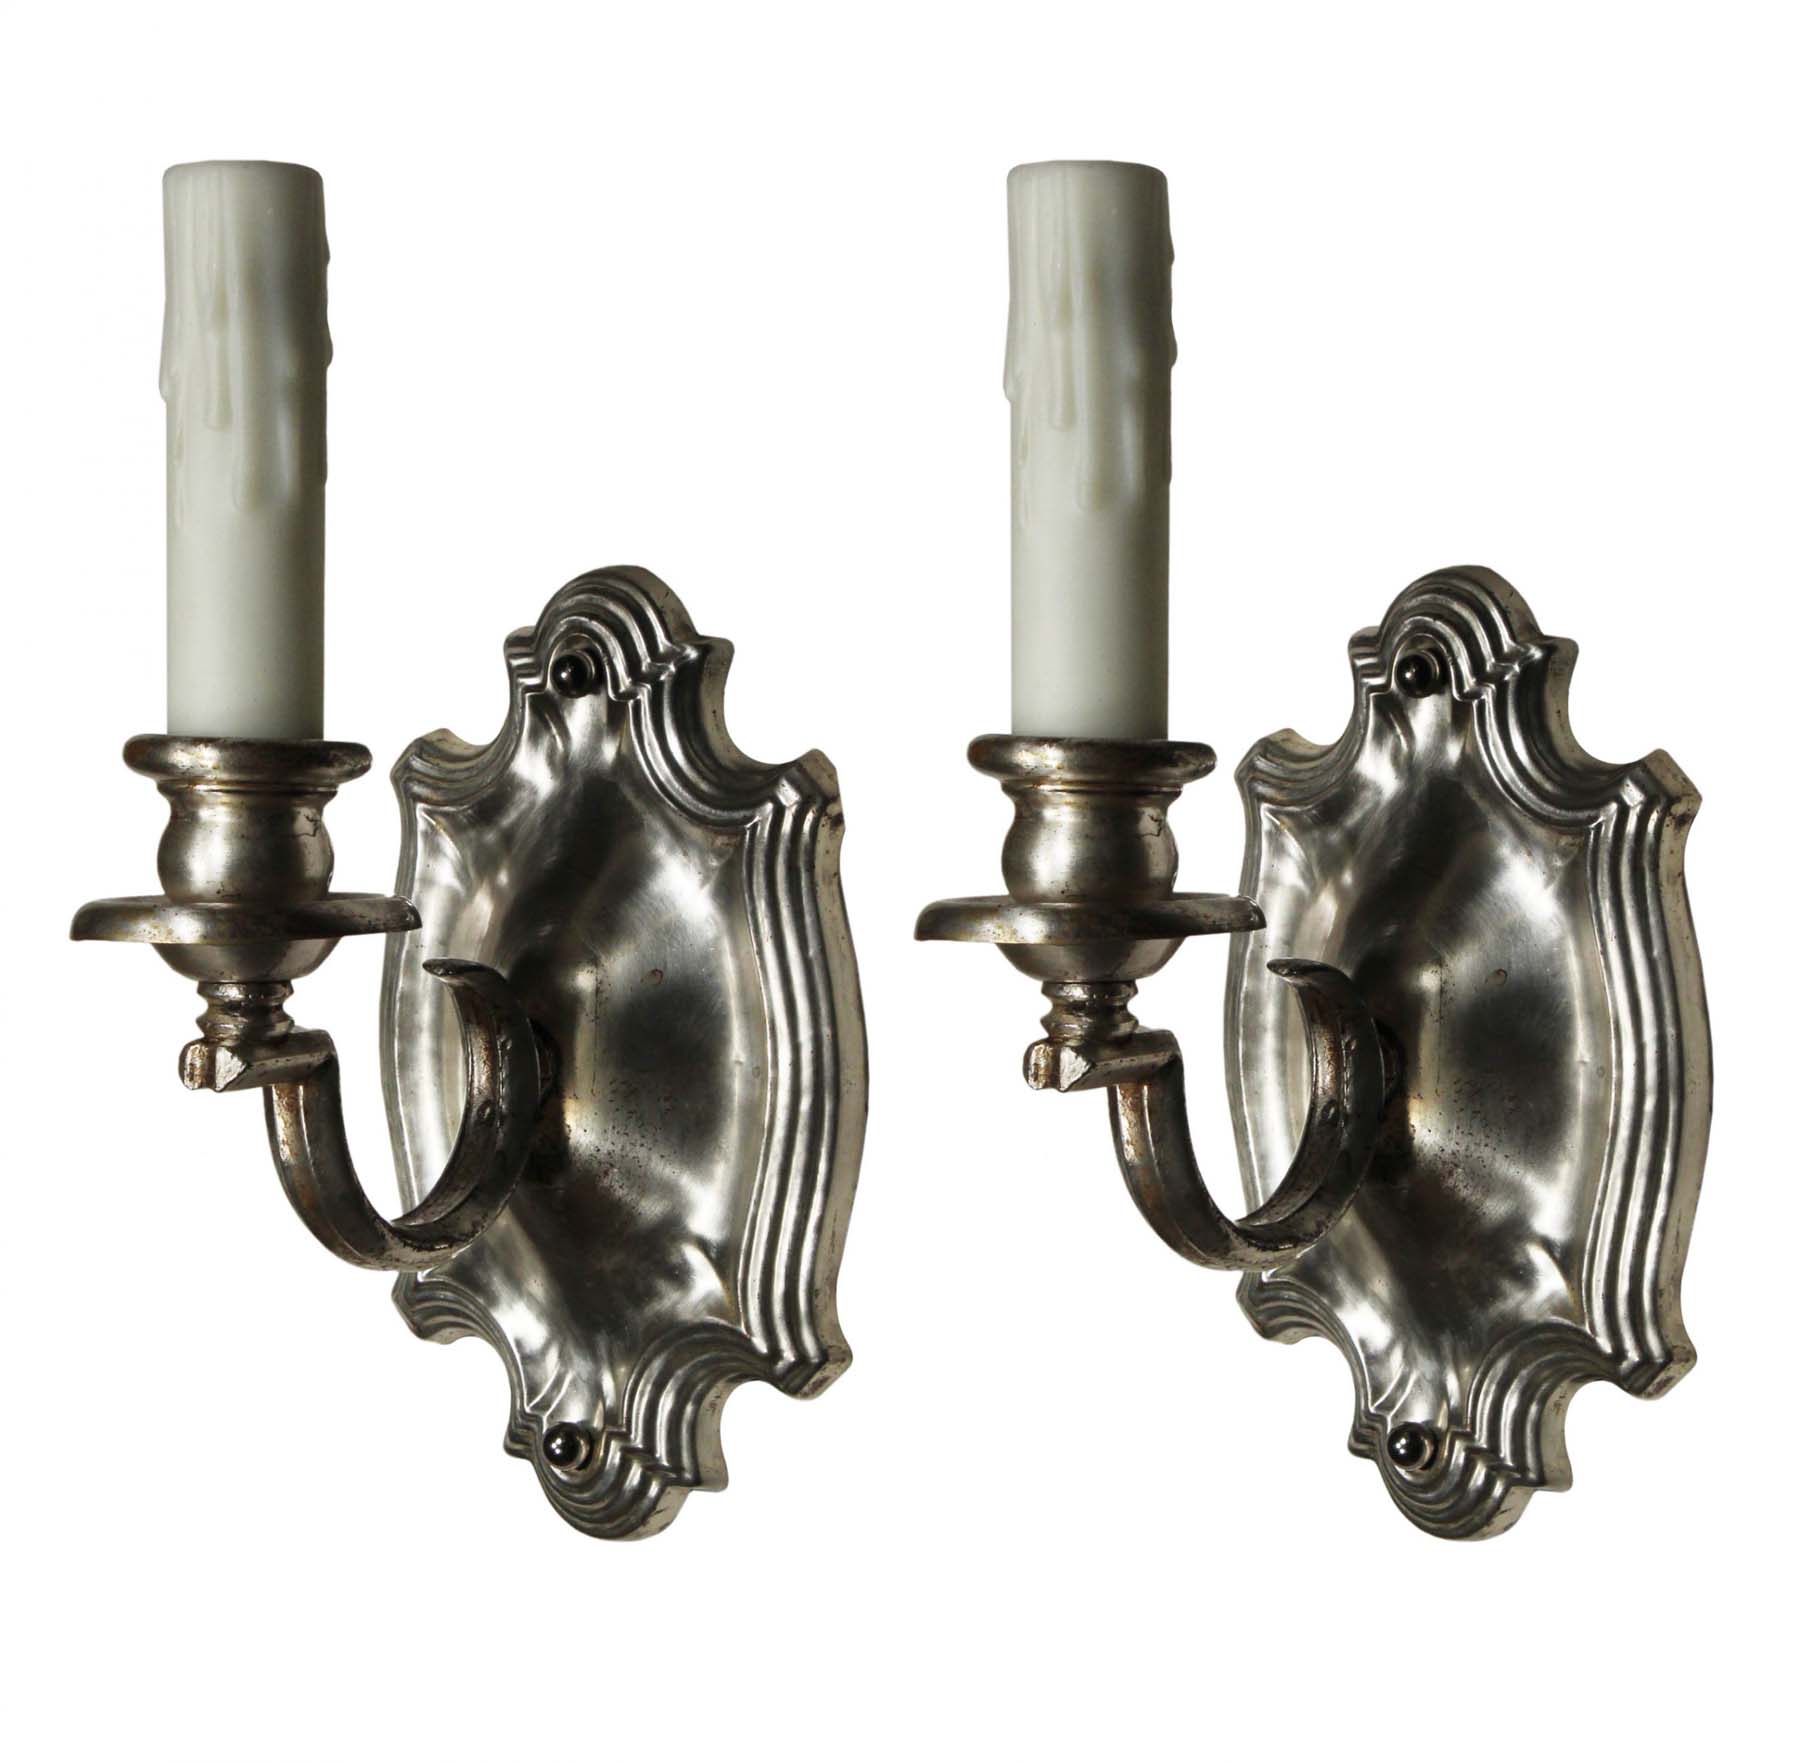 Antique Pair of Neoclassical Single-Arm Sconces, Silver-Plated-0